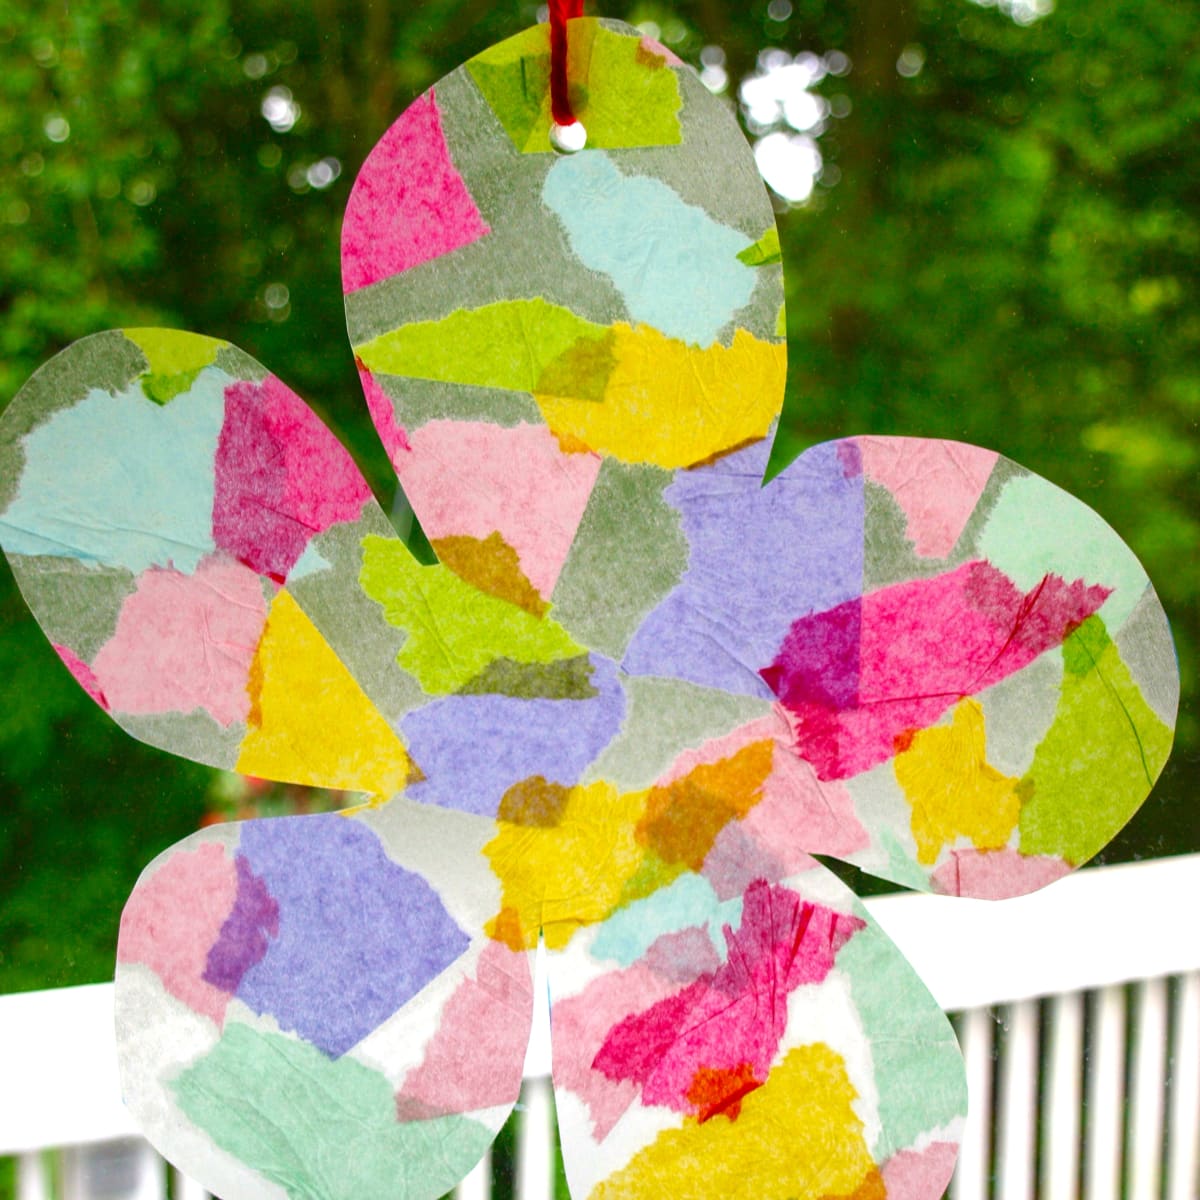 Fine Motor Sun Craft for Toddlers - My Bored Toddler